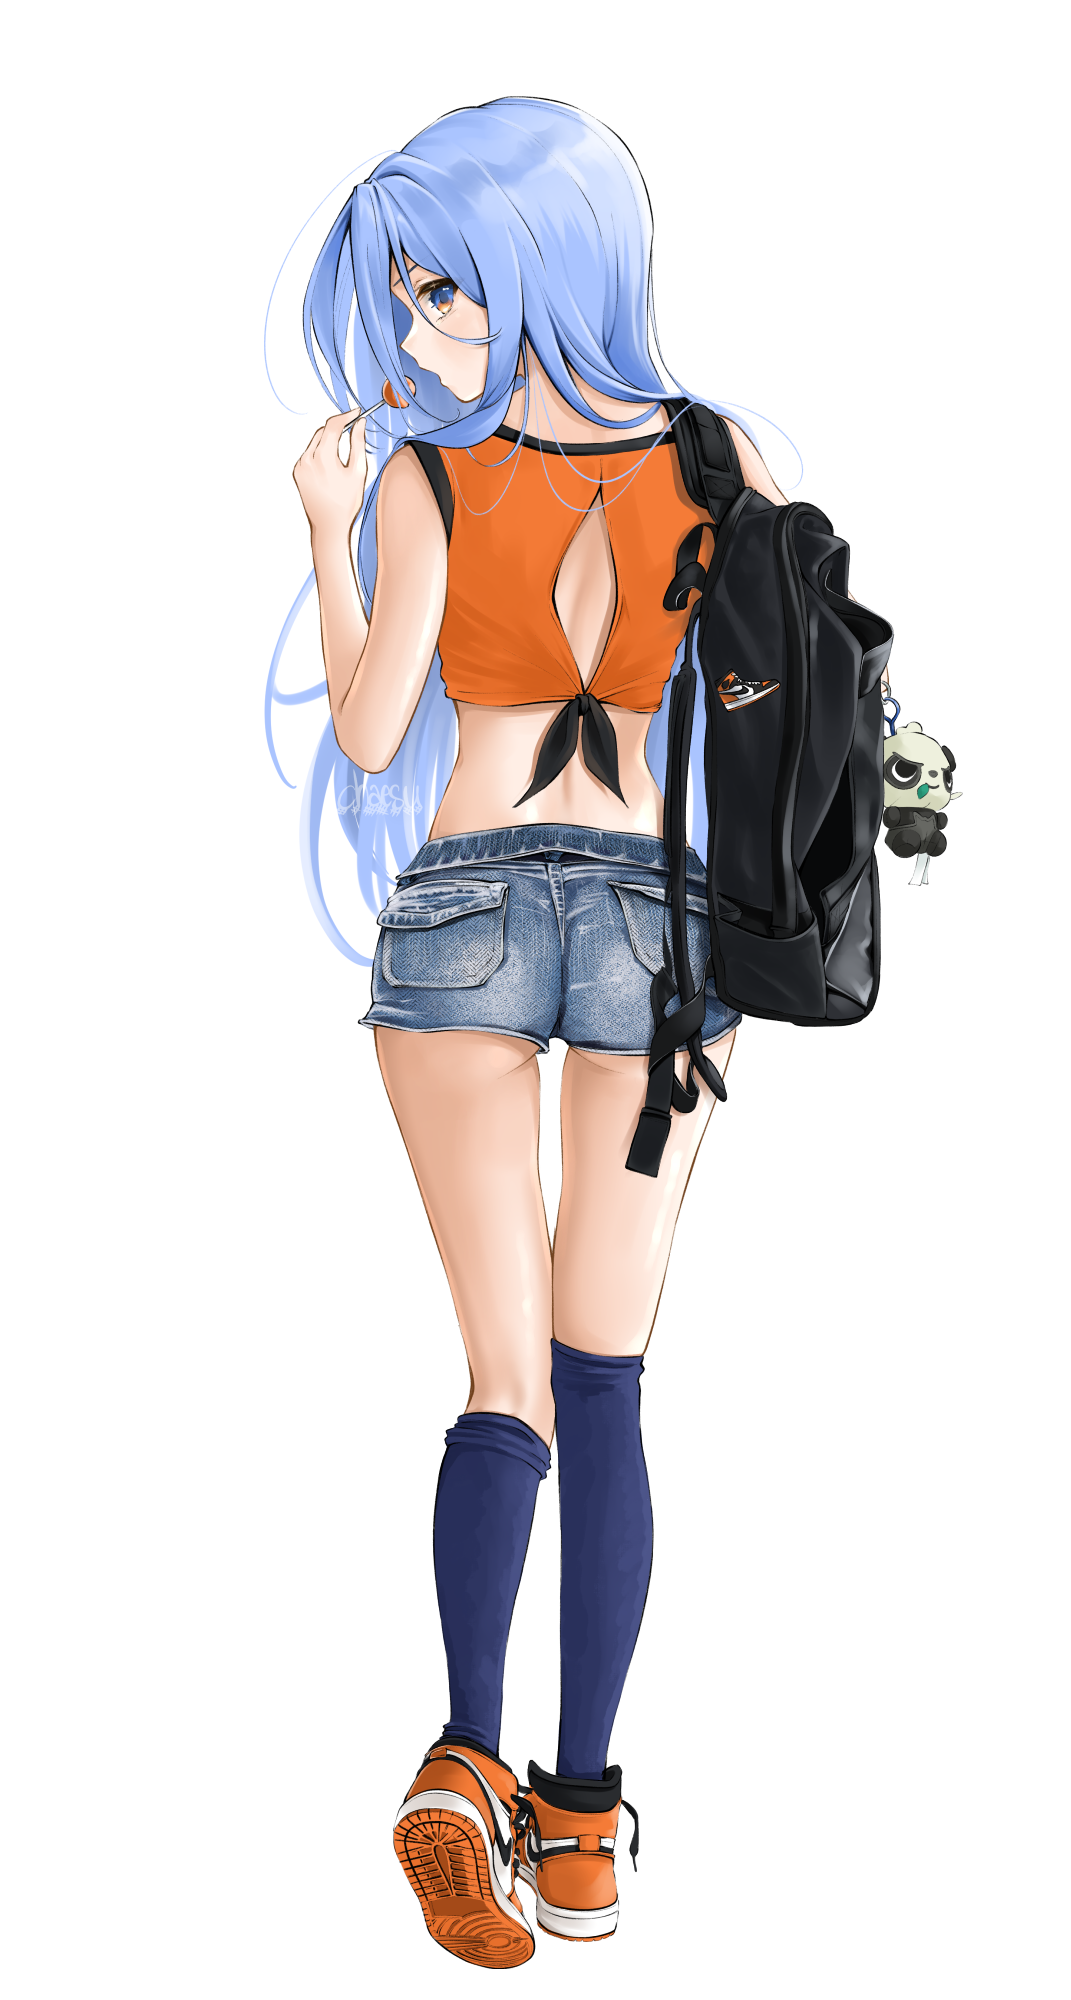 Anime 1071x2000 blue hair blue eyes anime girls anime short shorts backpacks socks knee high socks tied top back sneakers lollipop Chaesu jean shorts blue socks standing simple background white background shoes rear view portrait display long hair looking over shoulder crop top bare midriff open mouth